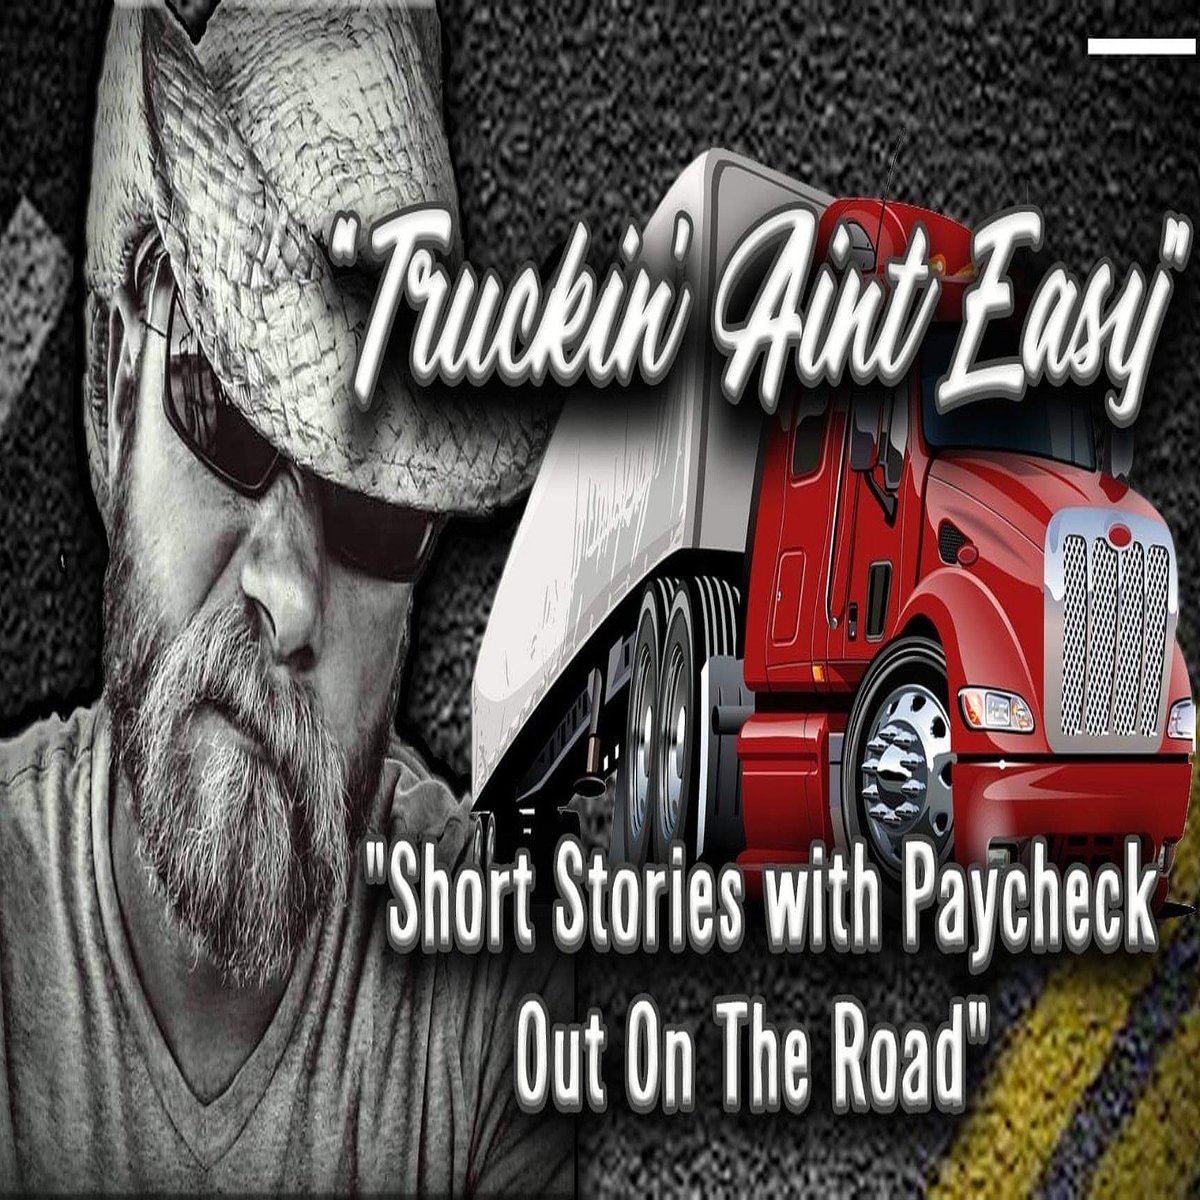 New Truckin' Ain't Easy BONUS EPISODE!! This time Paycheck is held hostage in a back alley and fears for his butthole!! Available wherever you listen to podcasts!!!
media.whooshkaa.com/podcasts/5127/…

#ThePWA #podernfamily #PodsUnited #podcast #PodcastFriday #PodcastsOfTwitter